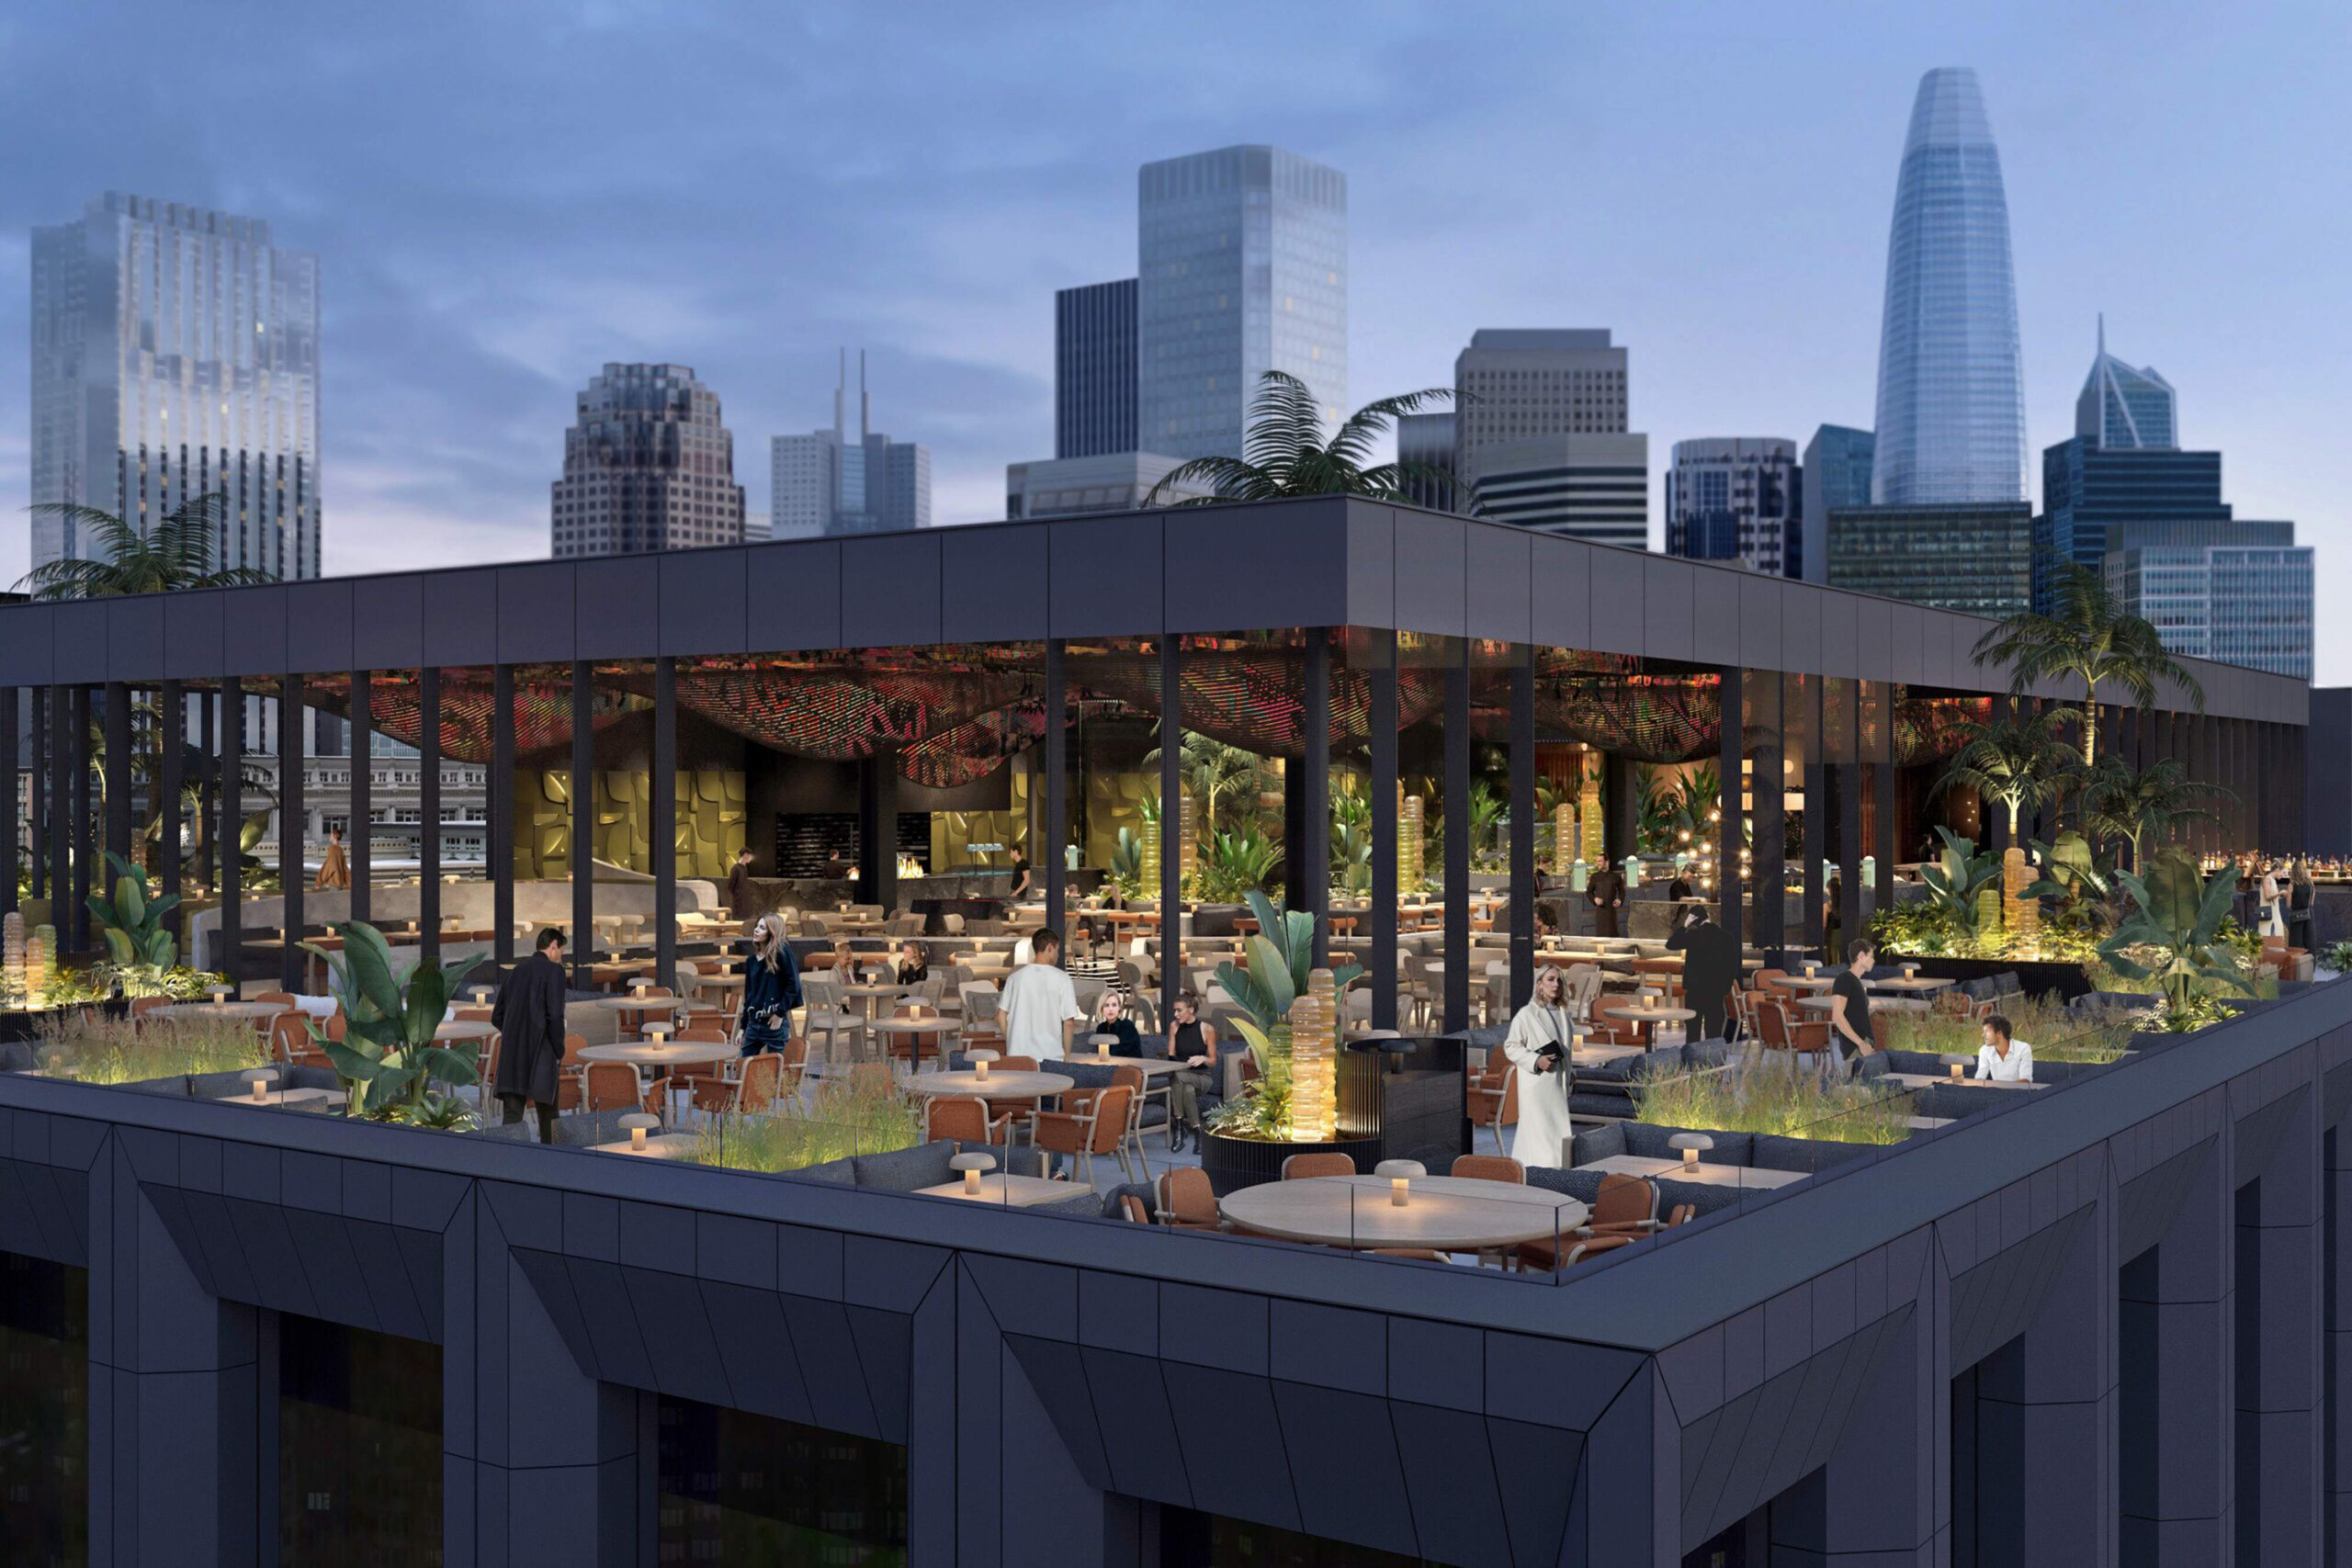 A view of a rooftop restaurant with tables and large glass windows, with the San Francisco city skyline behind it.